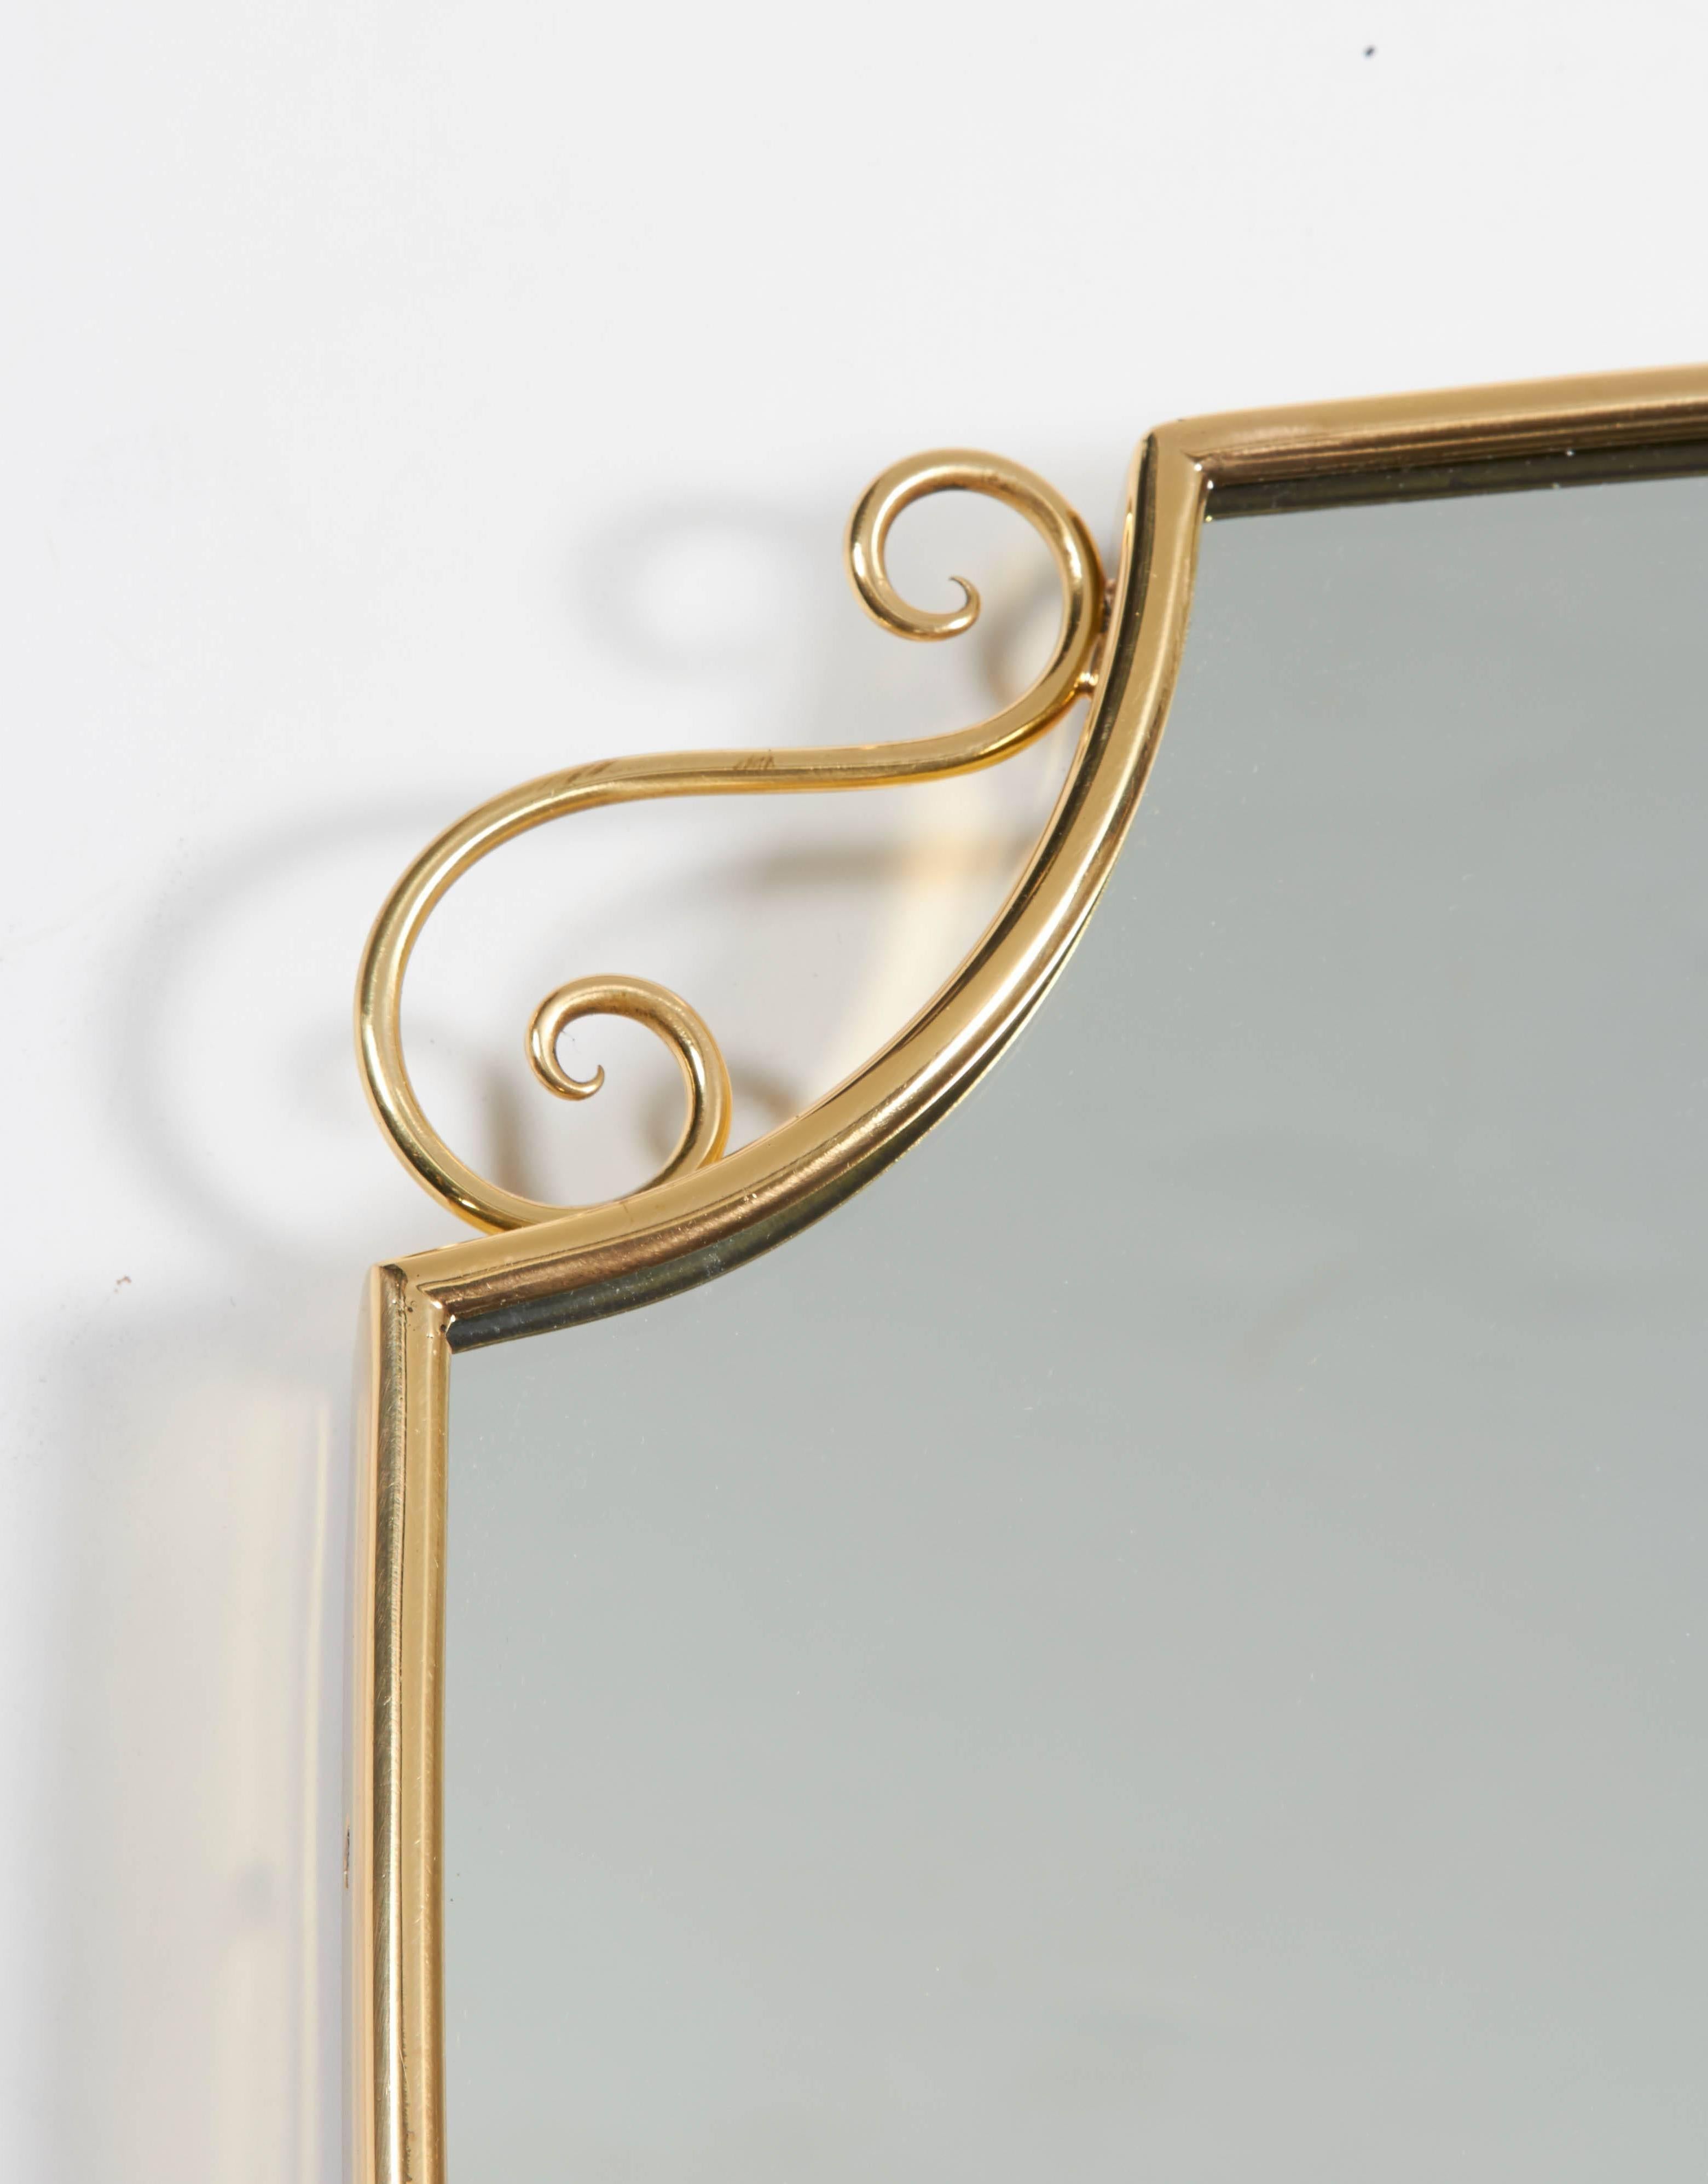 A lovely pair of 1950s, Italian shield shape brass frame mirrors. Each frame handmade with top multi loop and side scroll accents. One mirror measures 18.25" wide and 20.5" high. The second mirror measures 18.5" wide and 20.5"